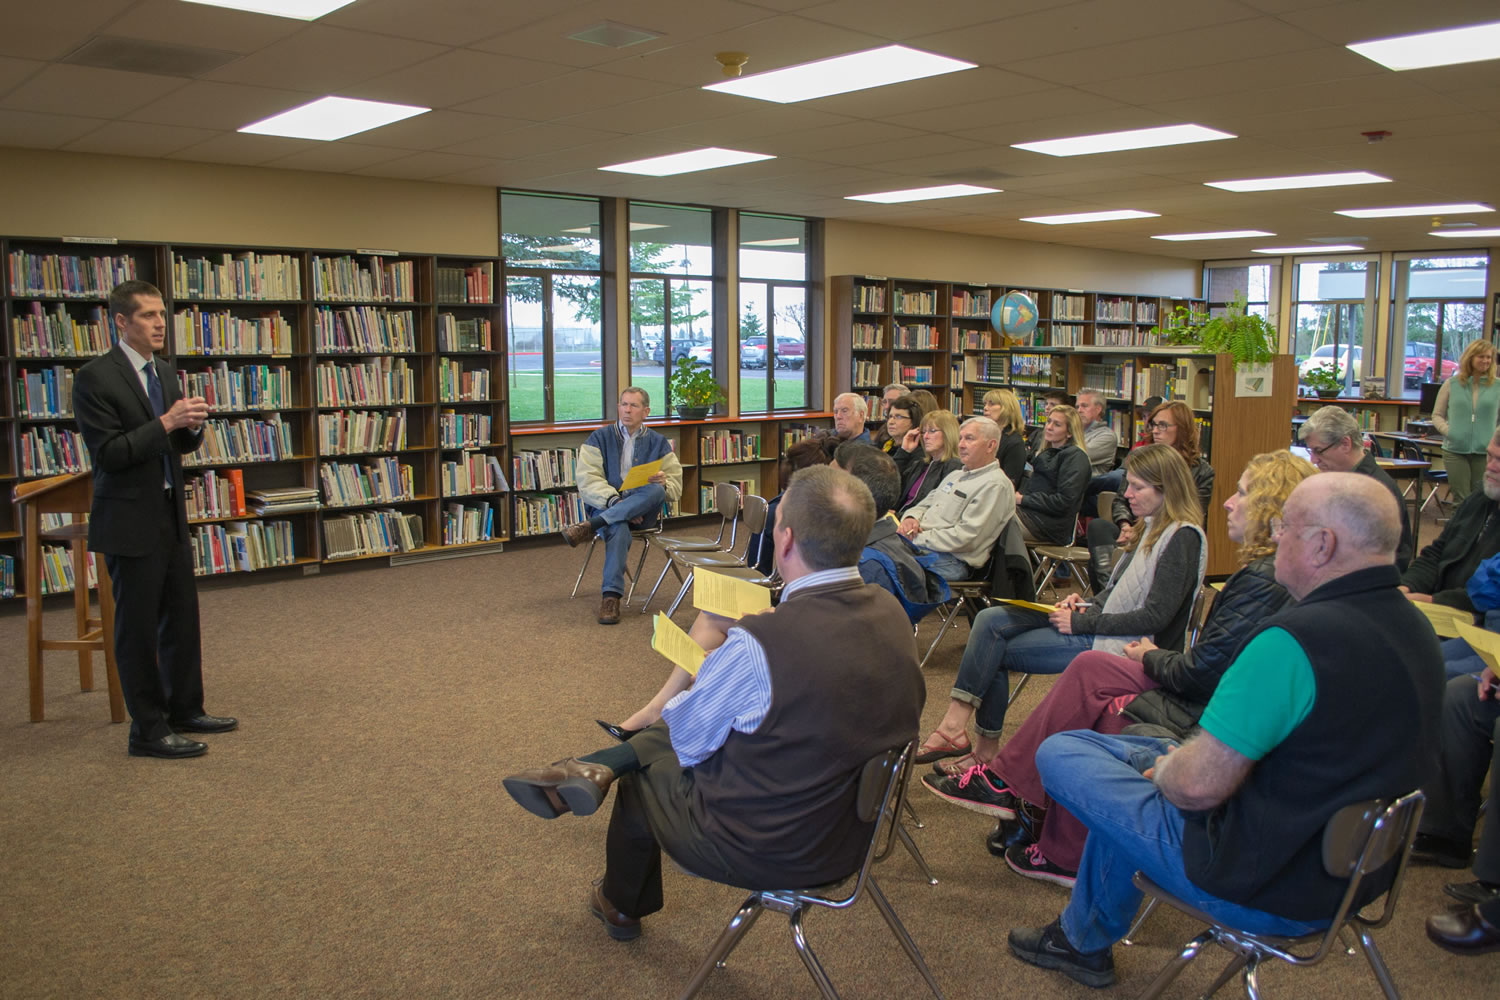 Nathan McCann, left, speaks with the local community during a forum in the Ridgefield High School library before getting the job.